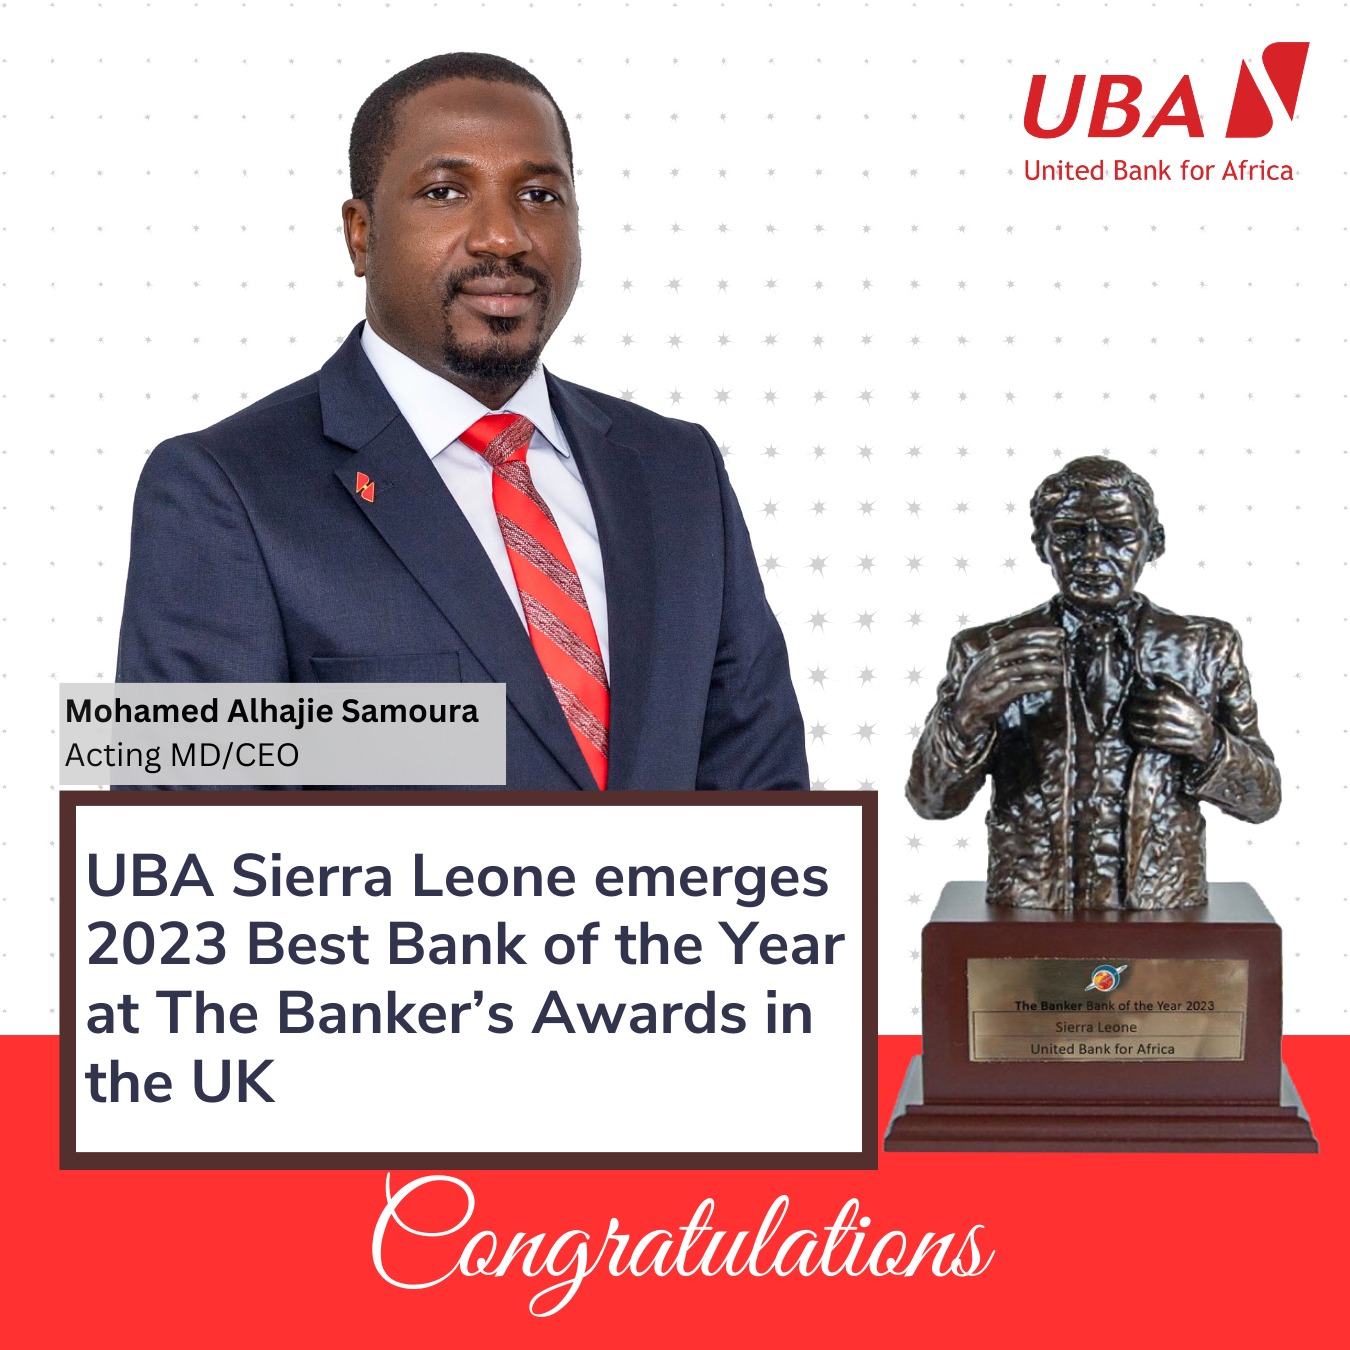 “UBA Sierra Leone: Crowned The Banker’s Best Bank – A Reign of Excellence!”